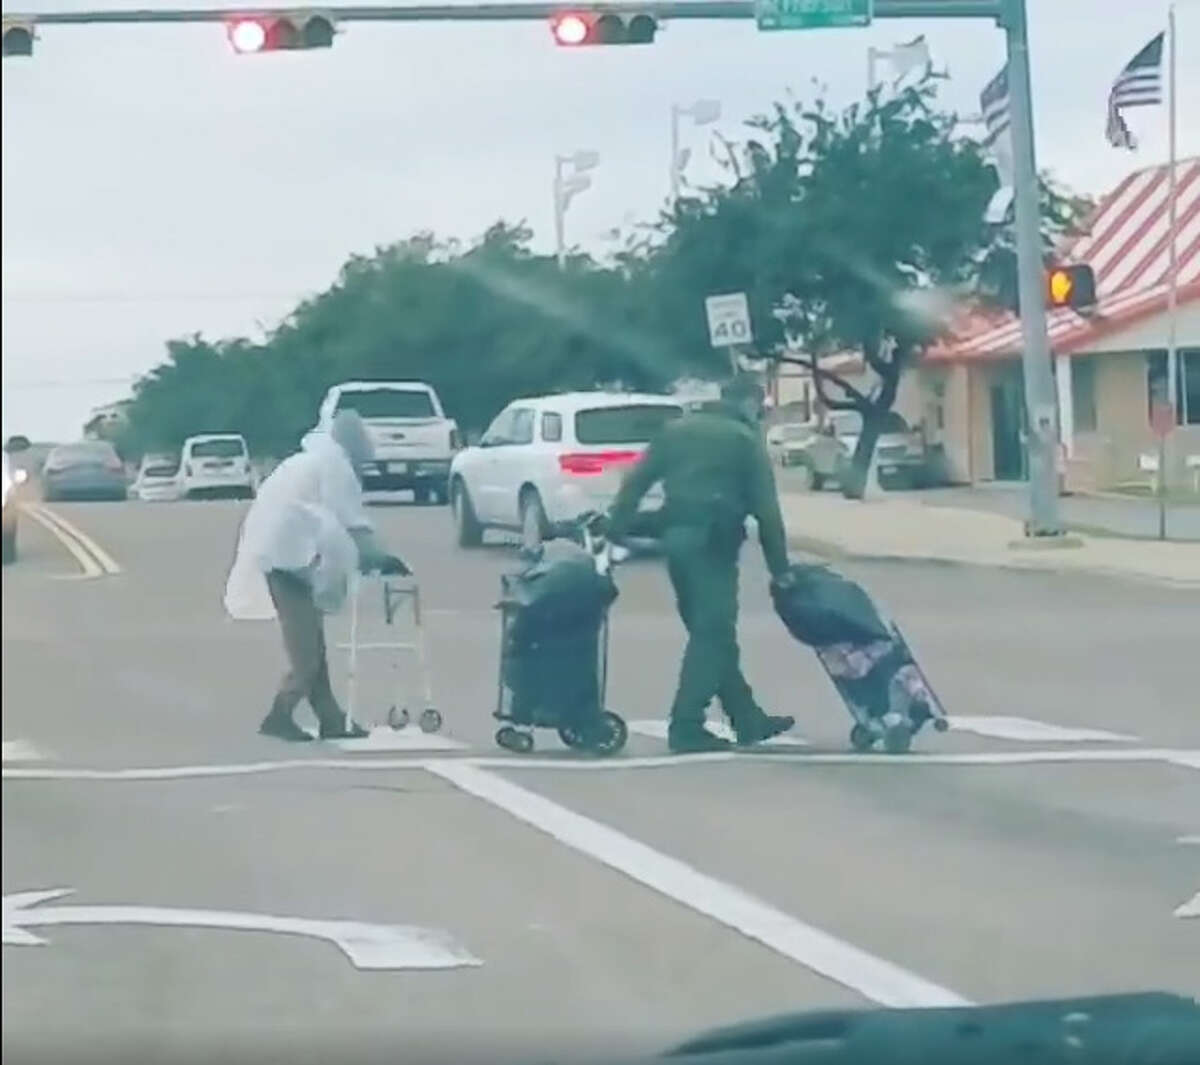 In a video posted on Facebook Wednesday, a Laredo Border Patrol agent is seen helping an elderly individual through a busy intersection.